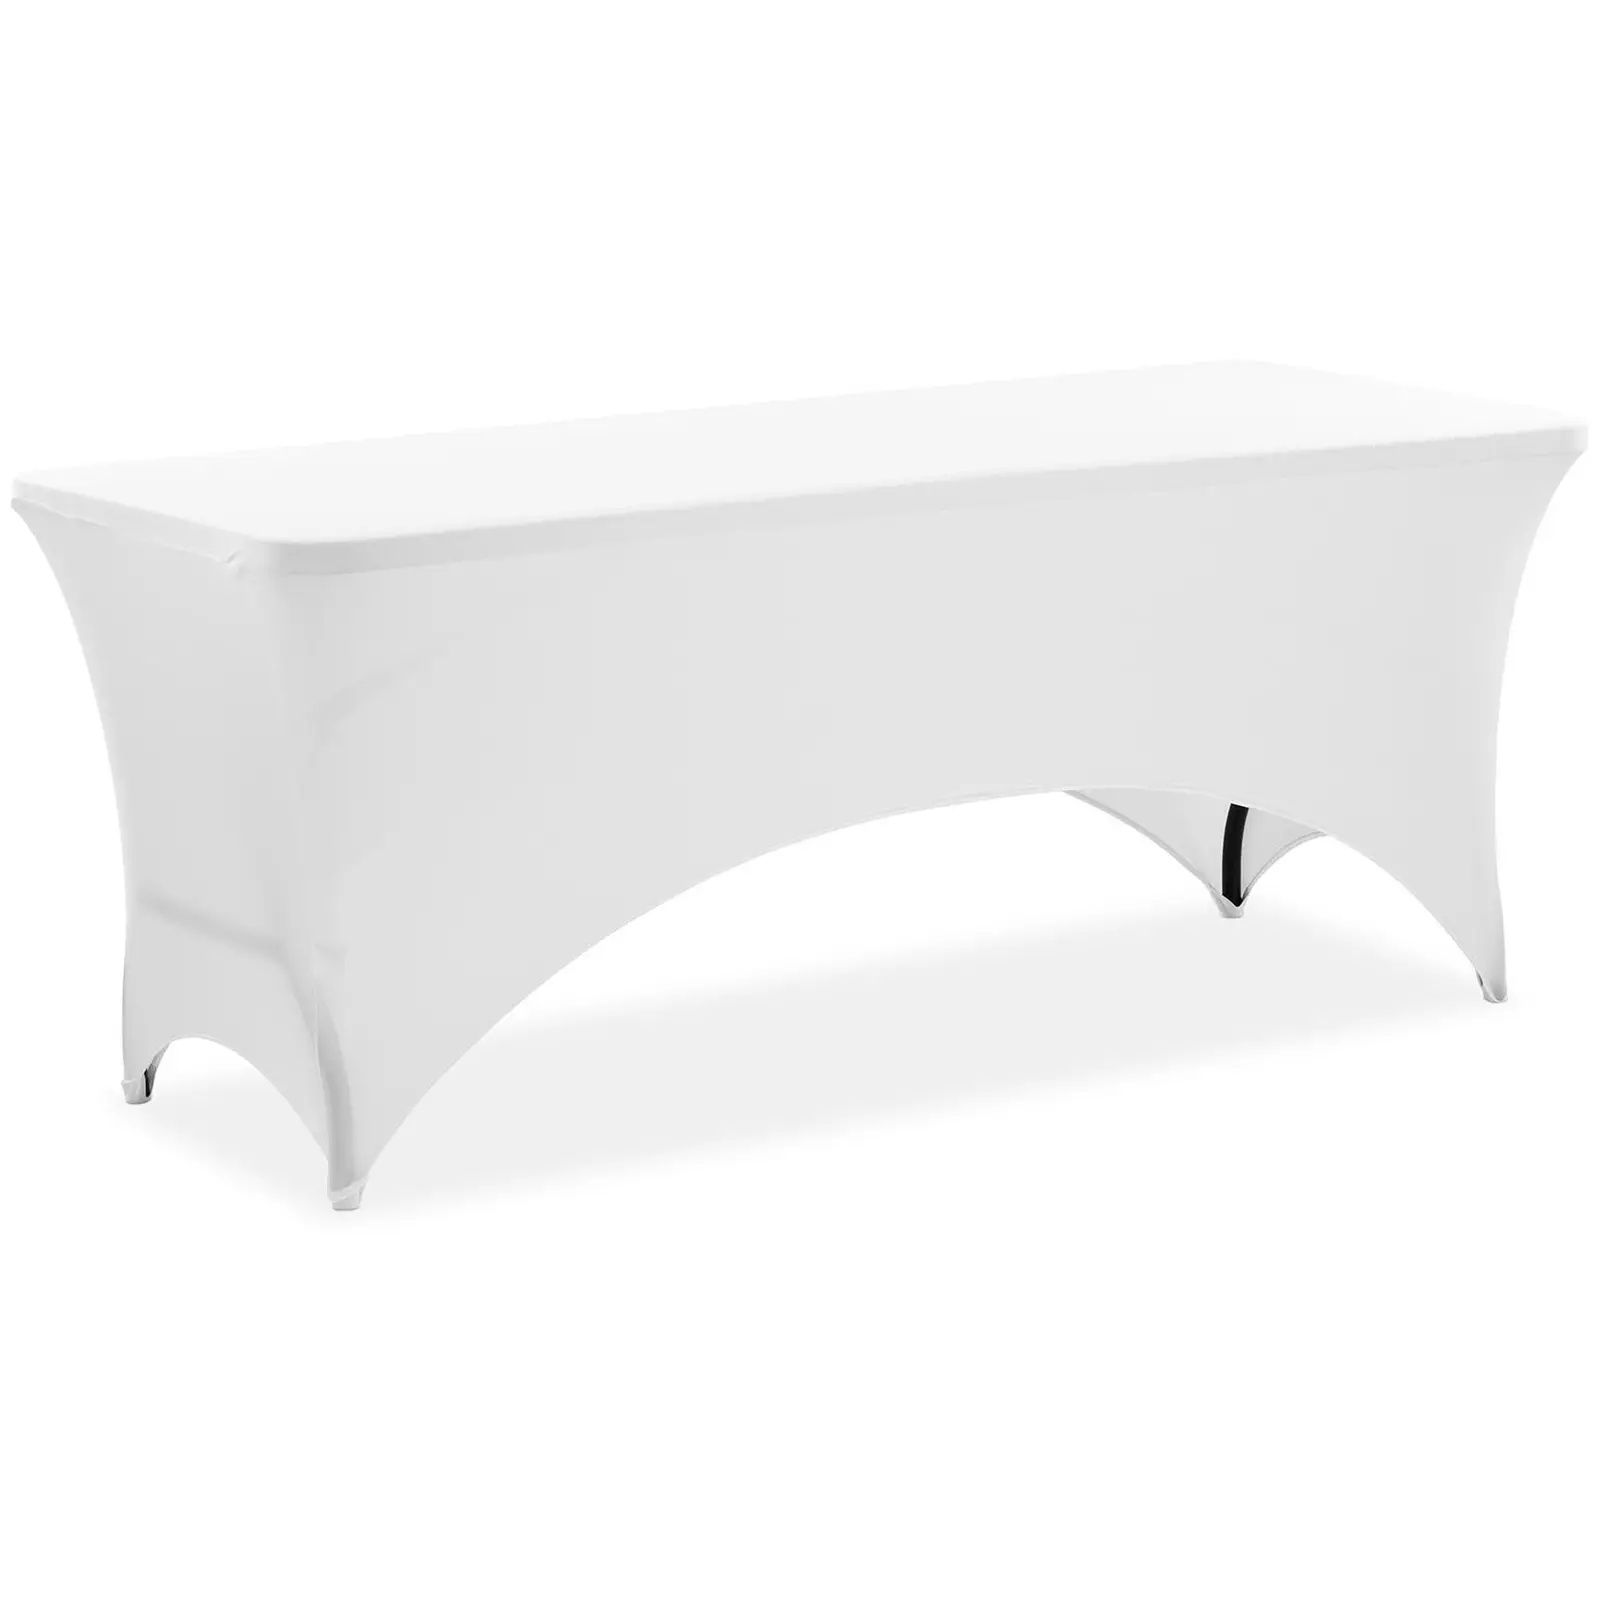 Table Cover - White - Royal Catering